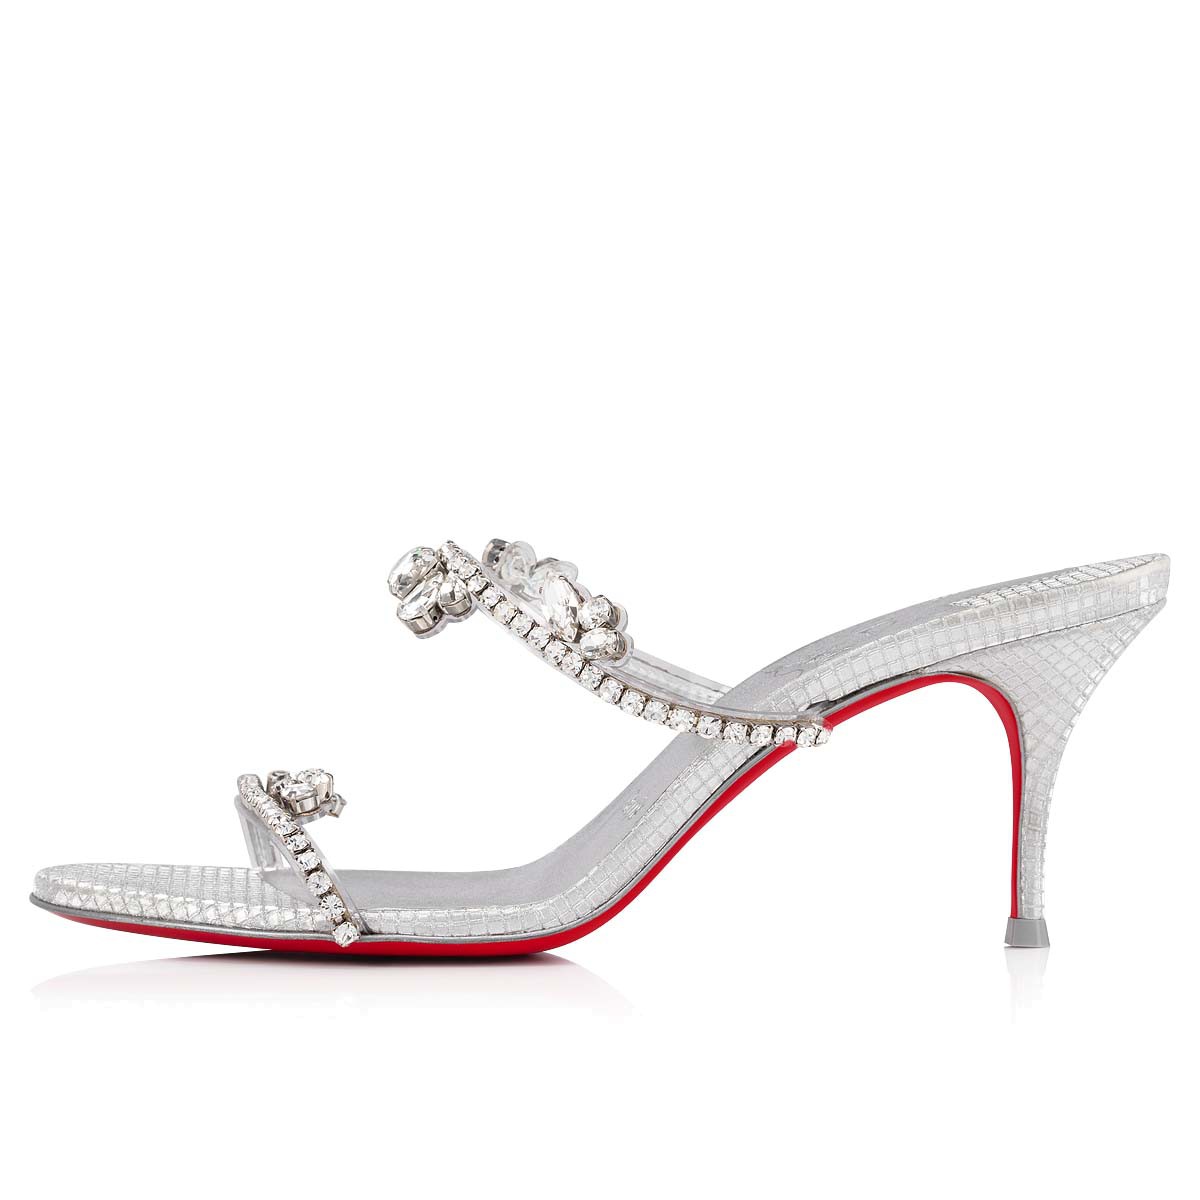 Shoes - Just Queen - Christian Louboutin